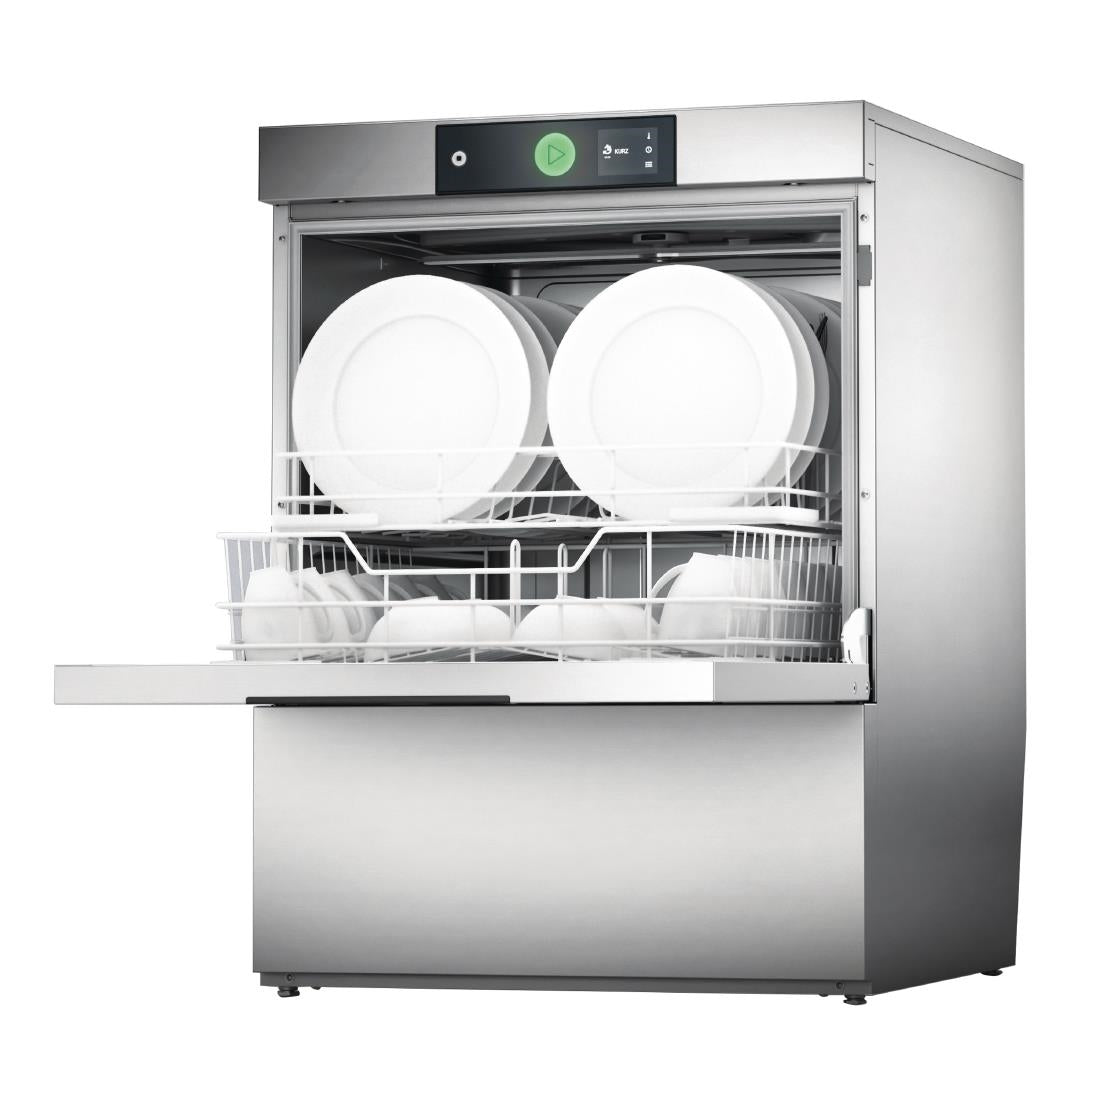 FD450 Hobart Double Basket Undercounter Dishwasher with Water Softener Care-10B